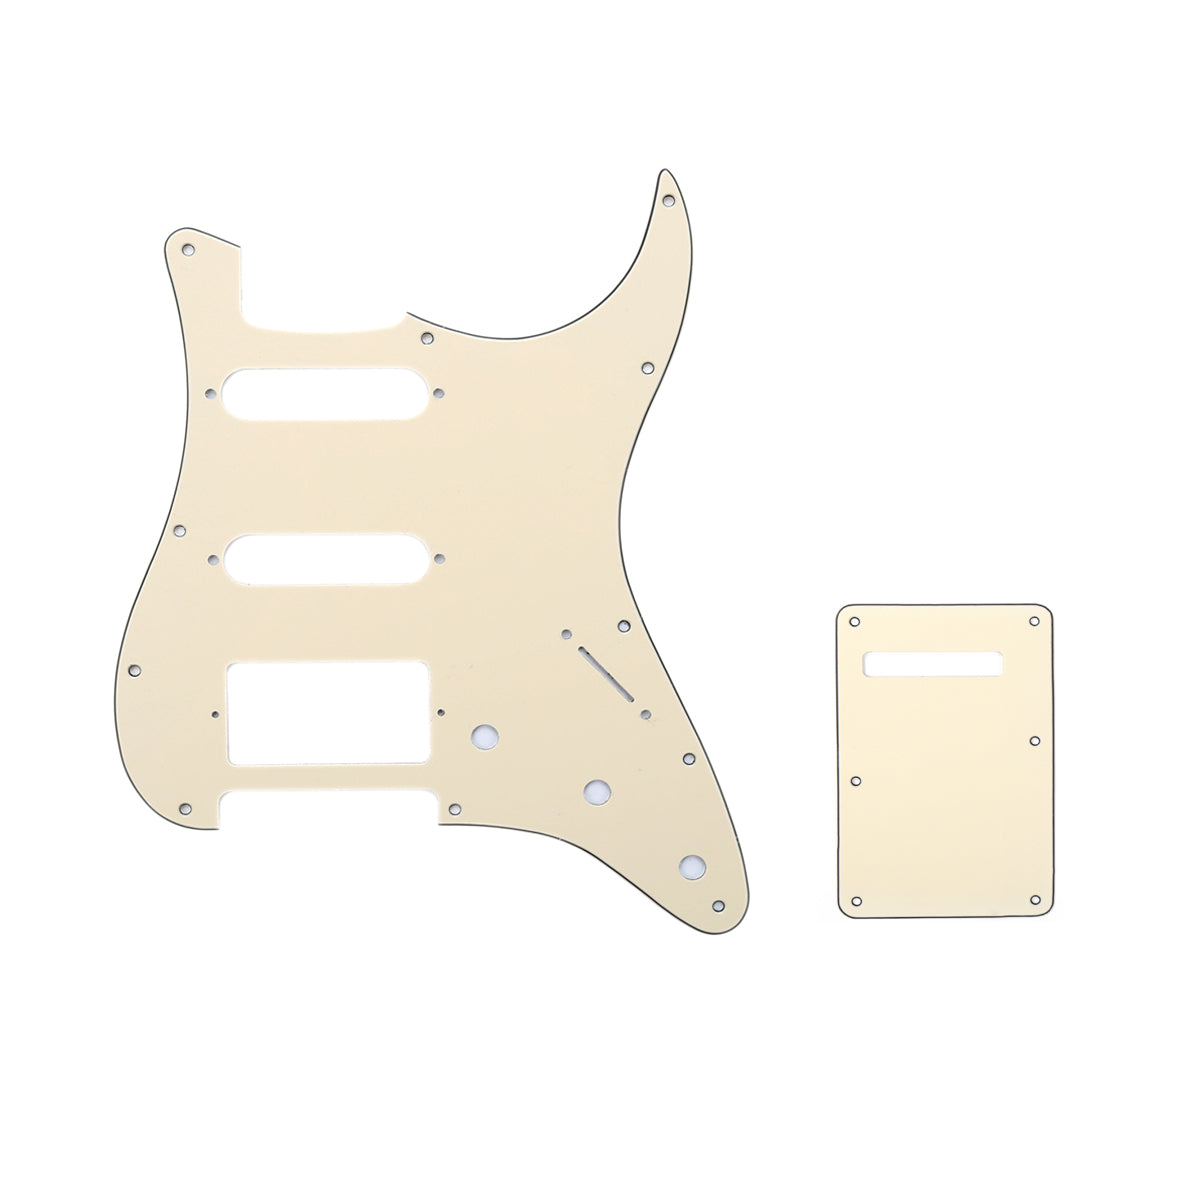 Musiclily SSH 11 Hole Strat Guitar Pickguard and BackPlate Set for Fender USA/Mexican Standard Stratocaster Modern Style, 3Ply Cream